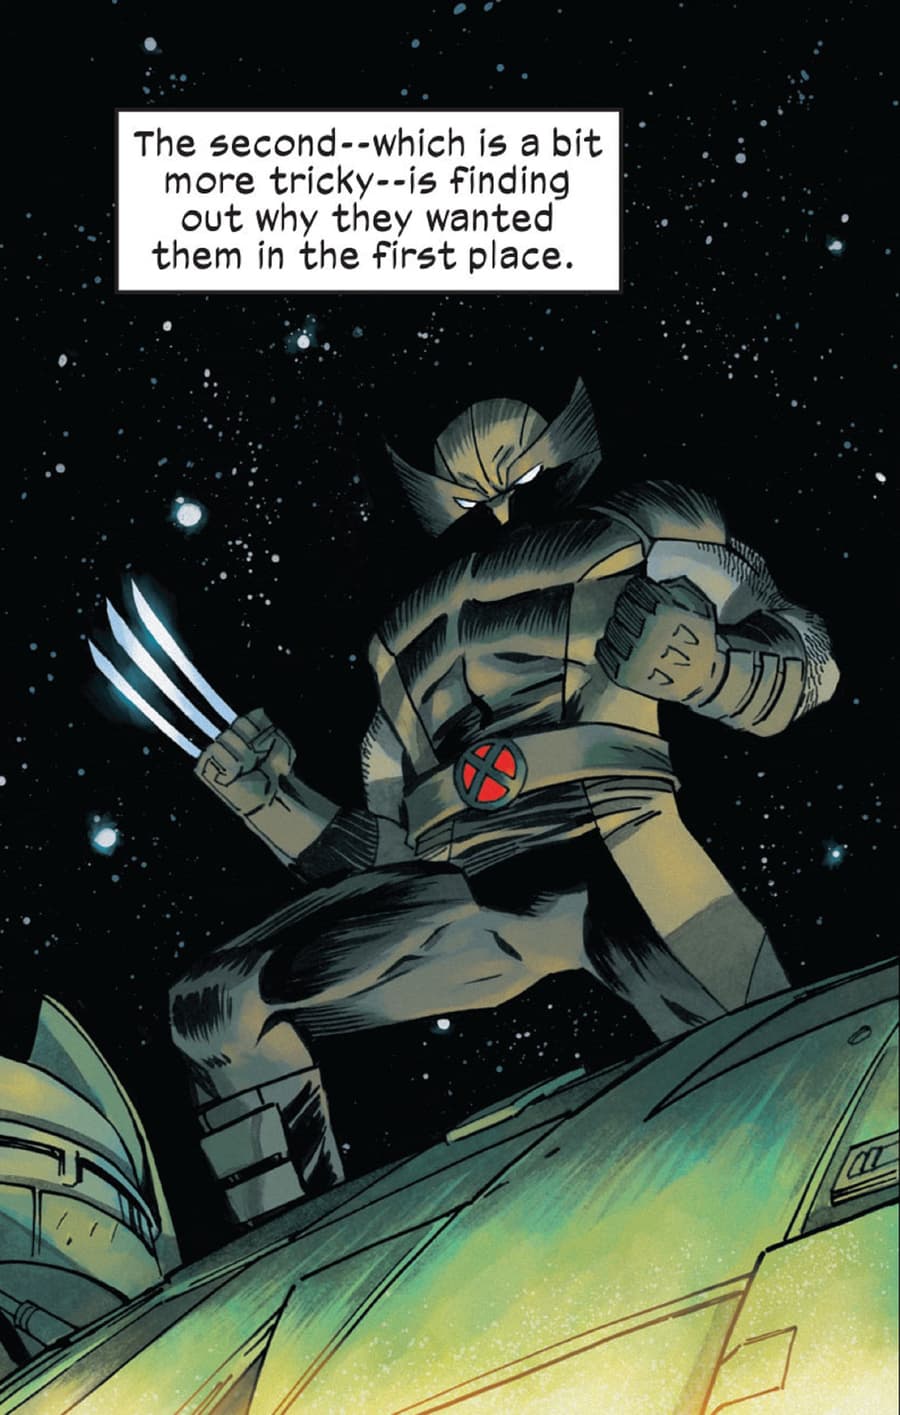 Sample art featuring art from X-MEN UNLIMITED #1.